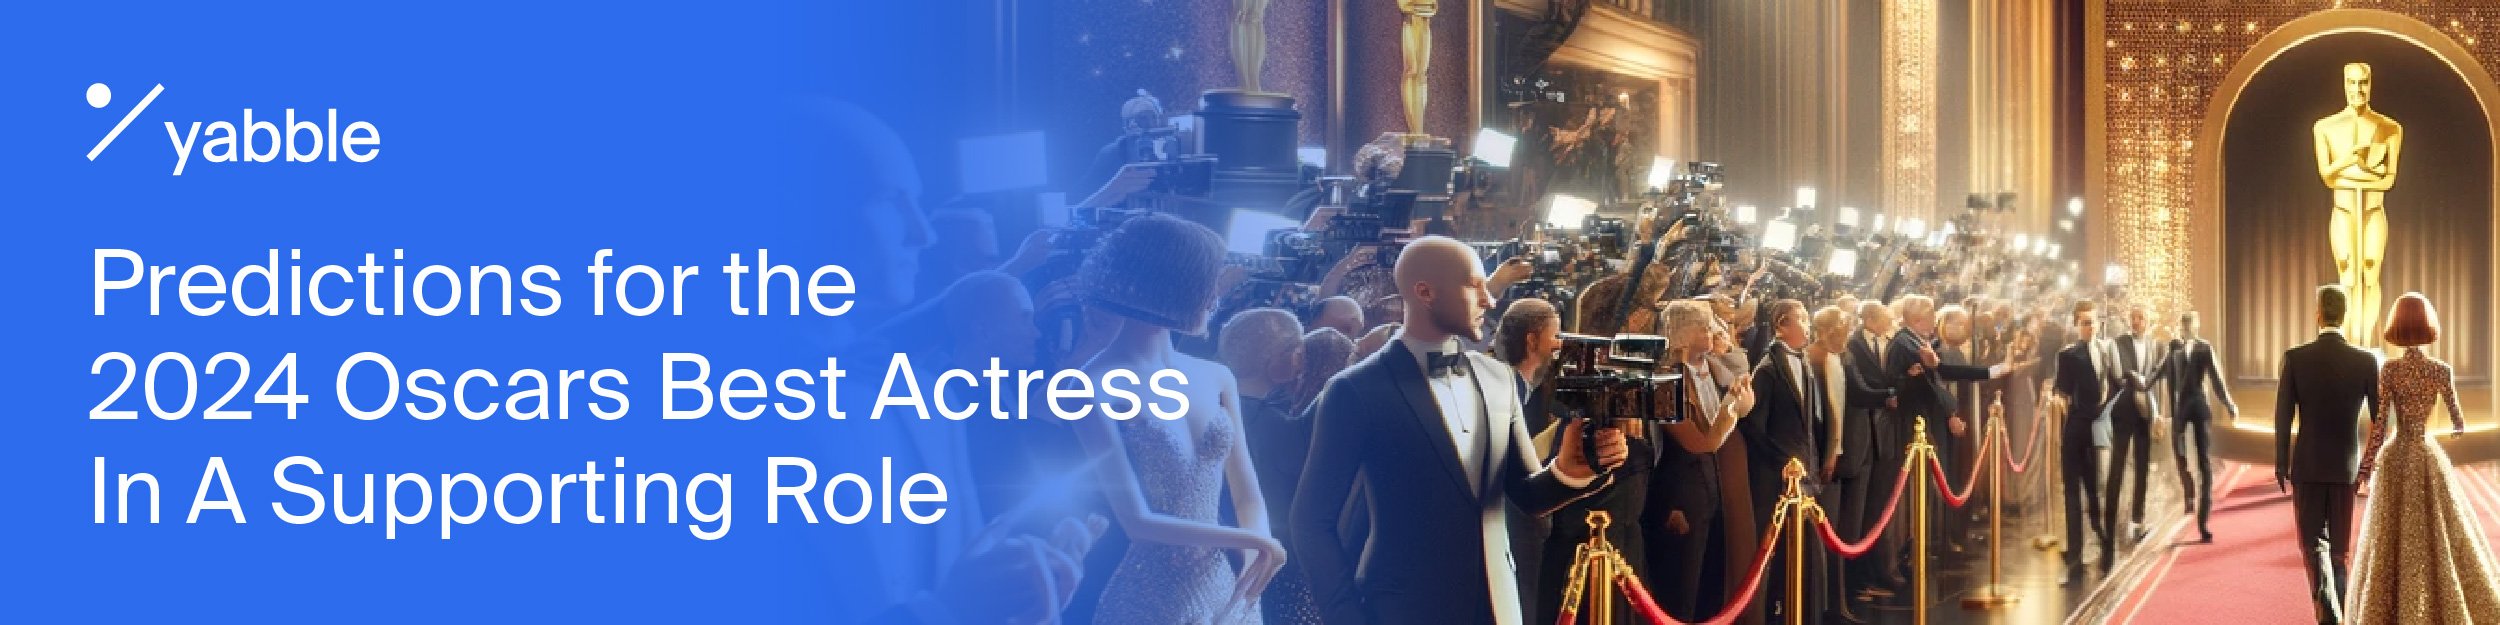 03-24 Oscars Campaign Blog Image_Yabble-Virtual-Audiences-Insights-2024-Oscars-Best-Actress-Supporting-Role